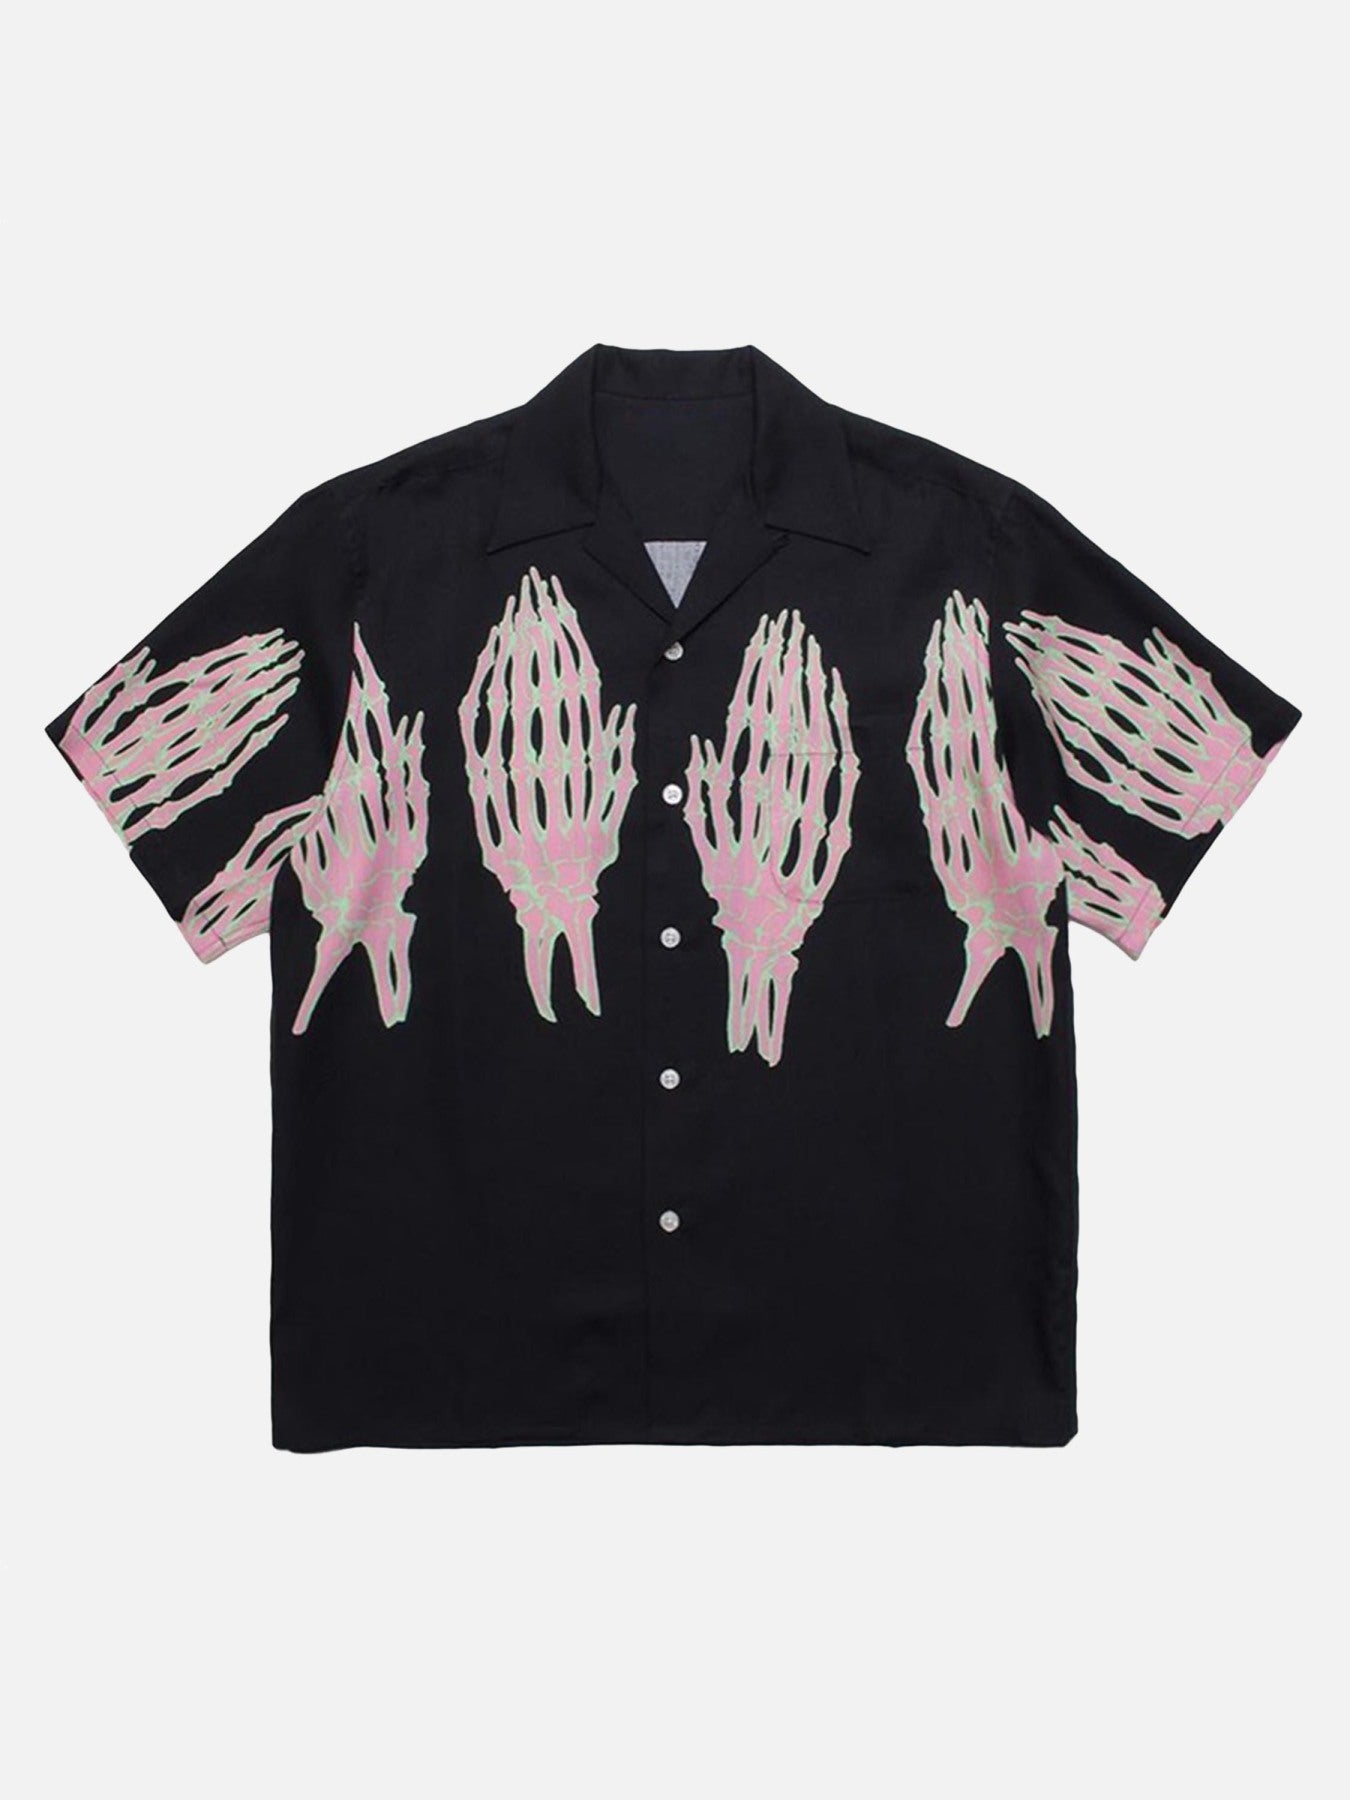 The Supermade Ghost Hand Ghost Claw Casual Print Shirt